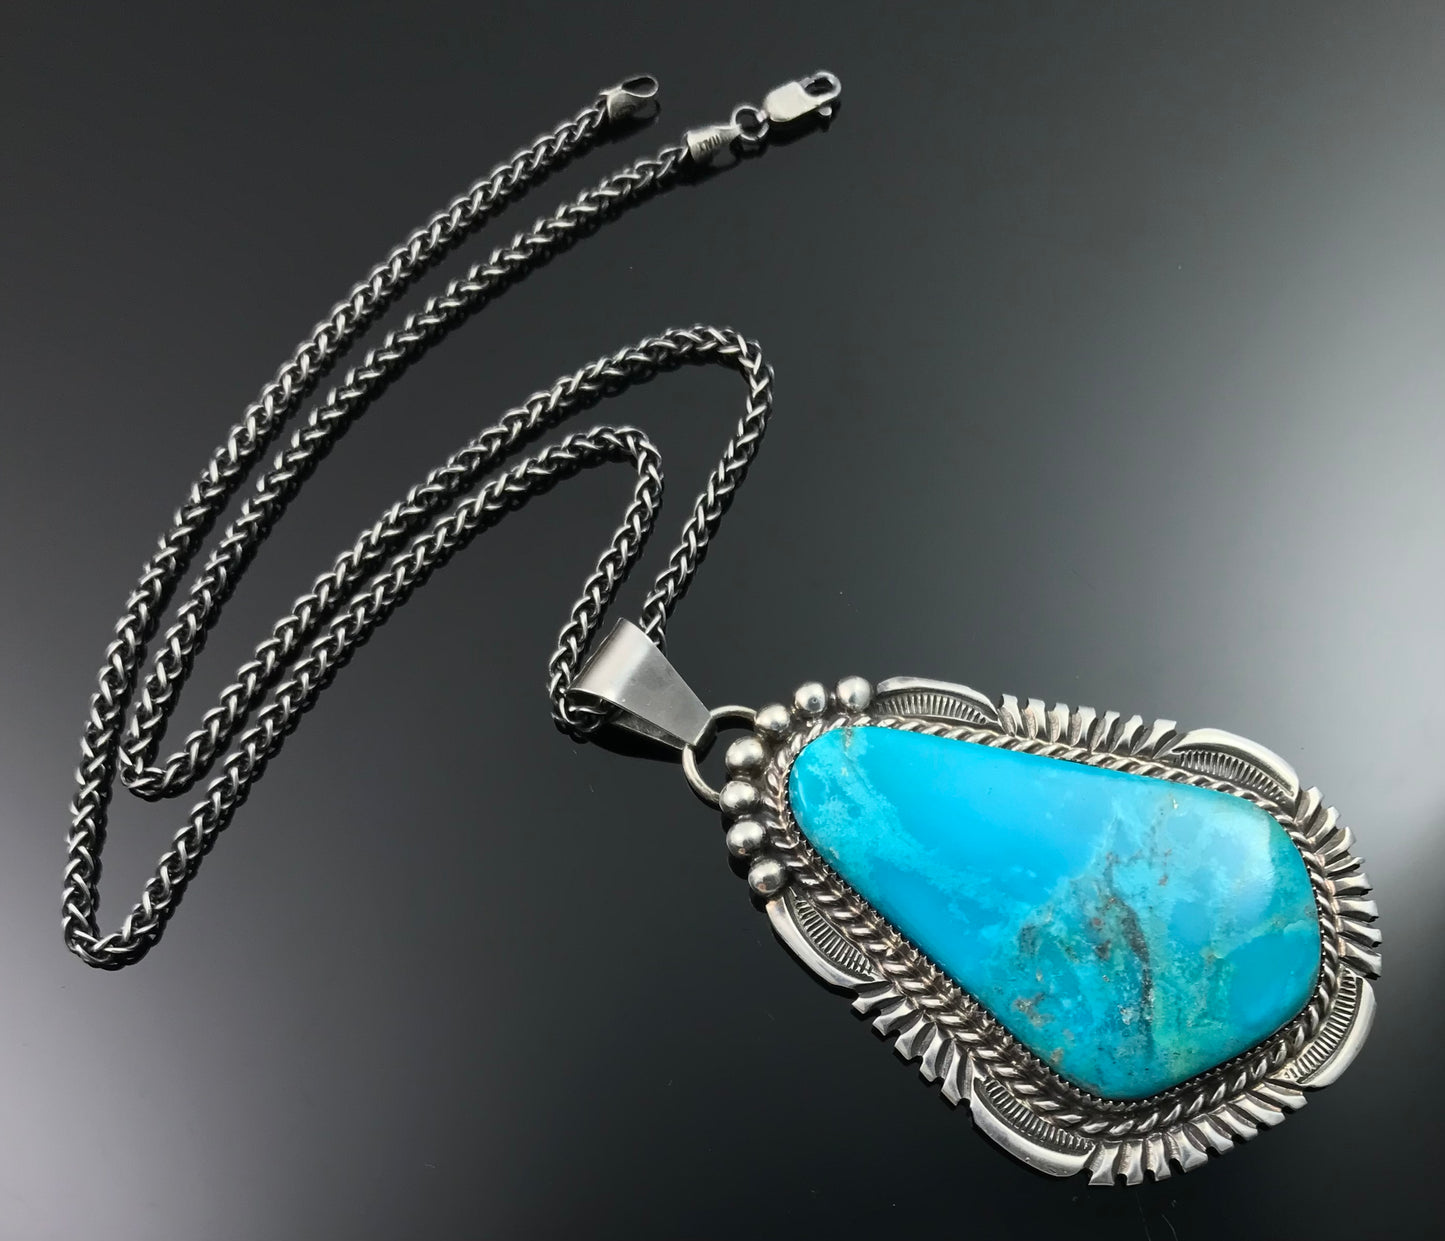 Large Turquoise Navajo Necklace Pendant Native American Sterling Silver - Alvin Joe